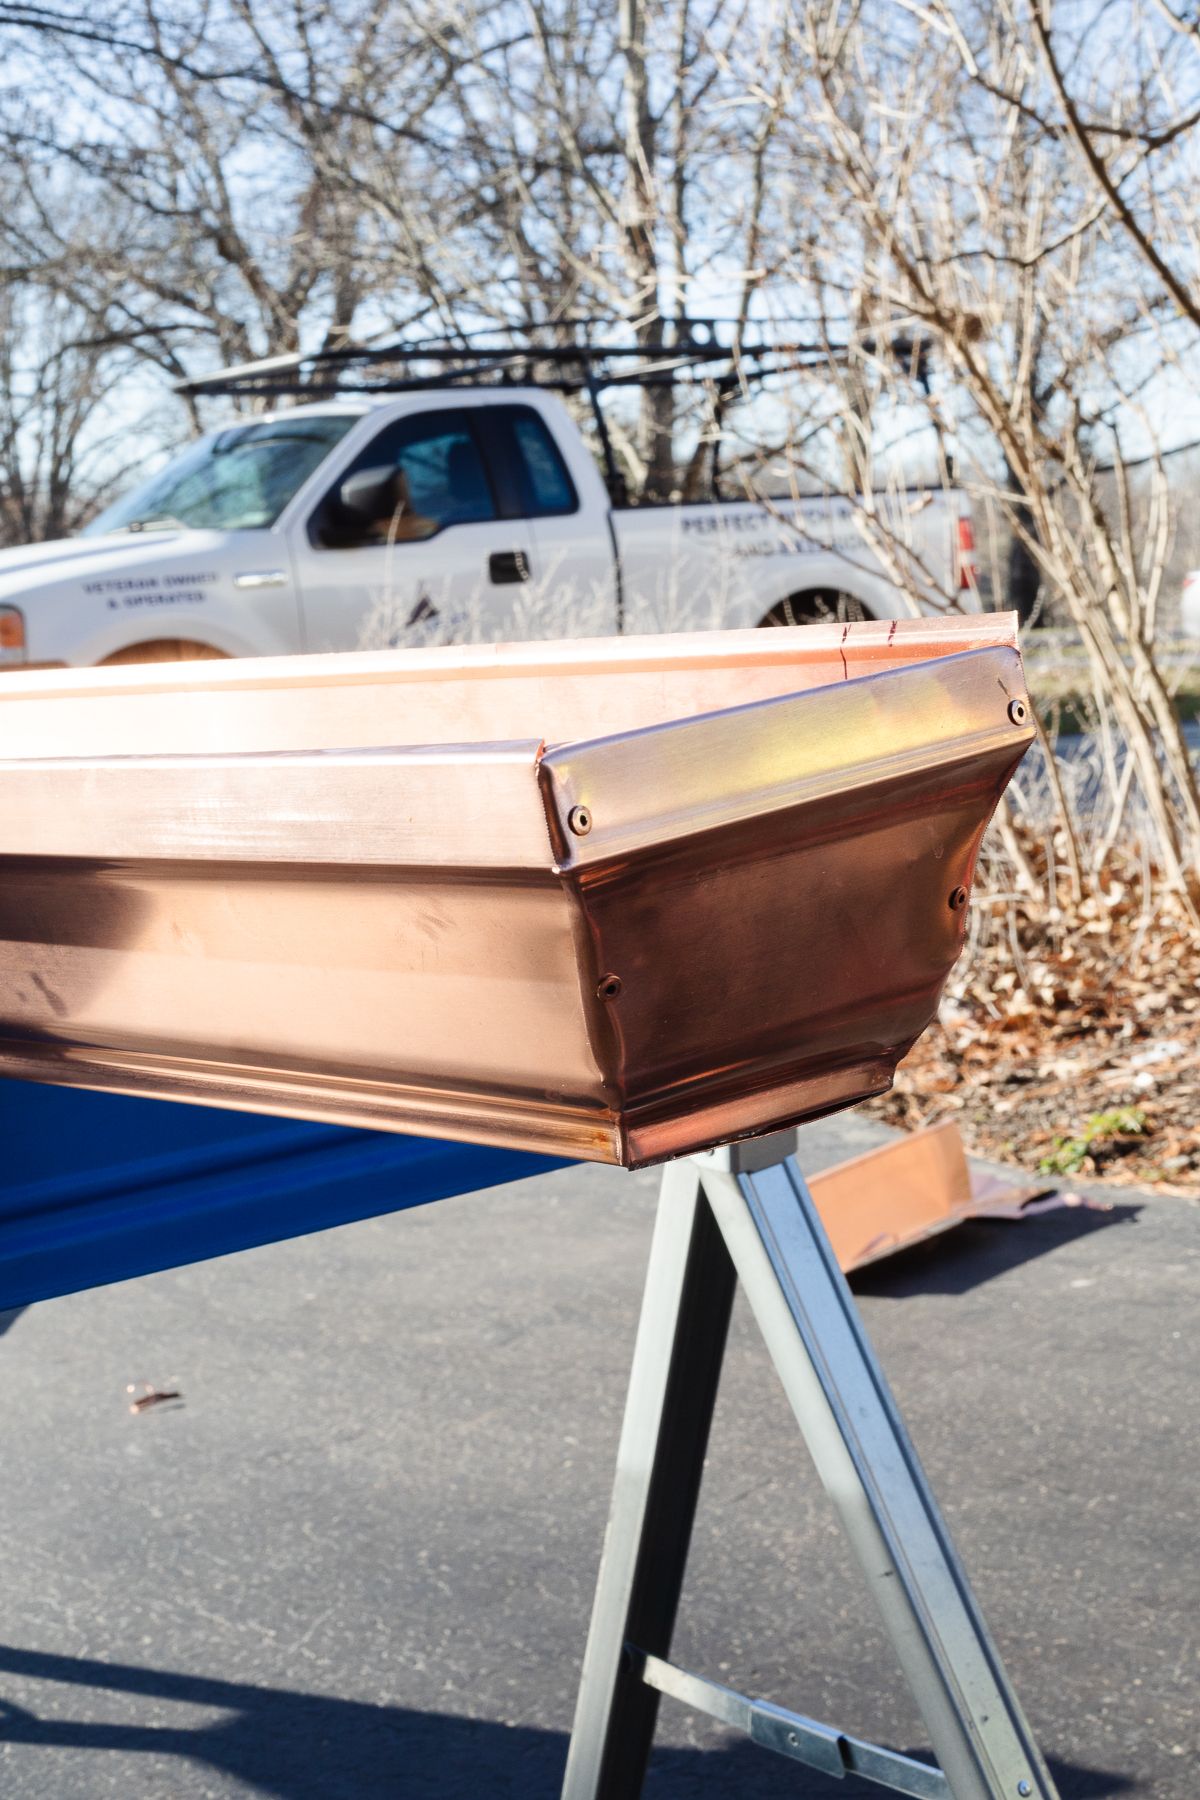 A copper gutter on a workbench with a work truck in the background